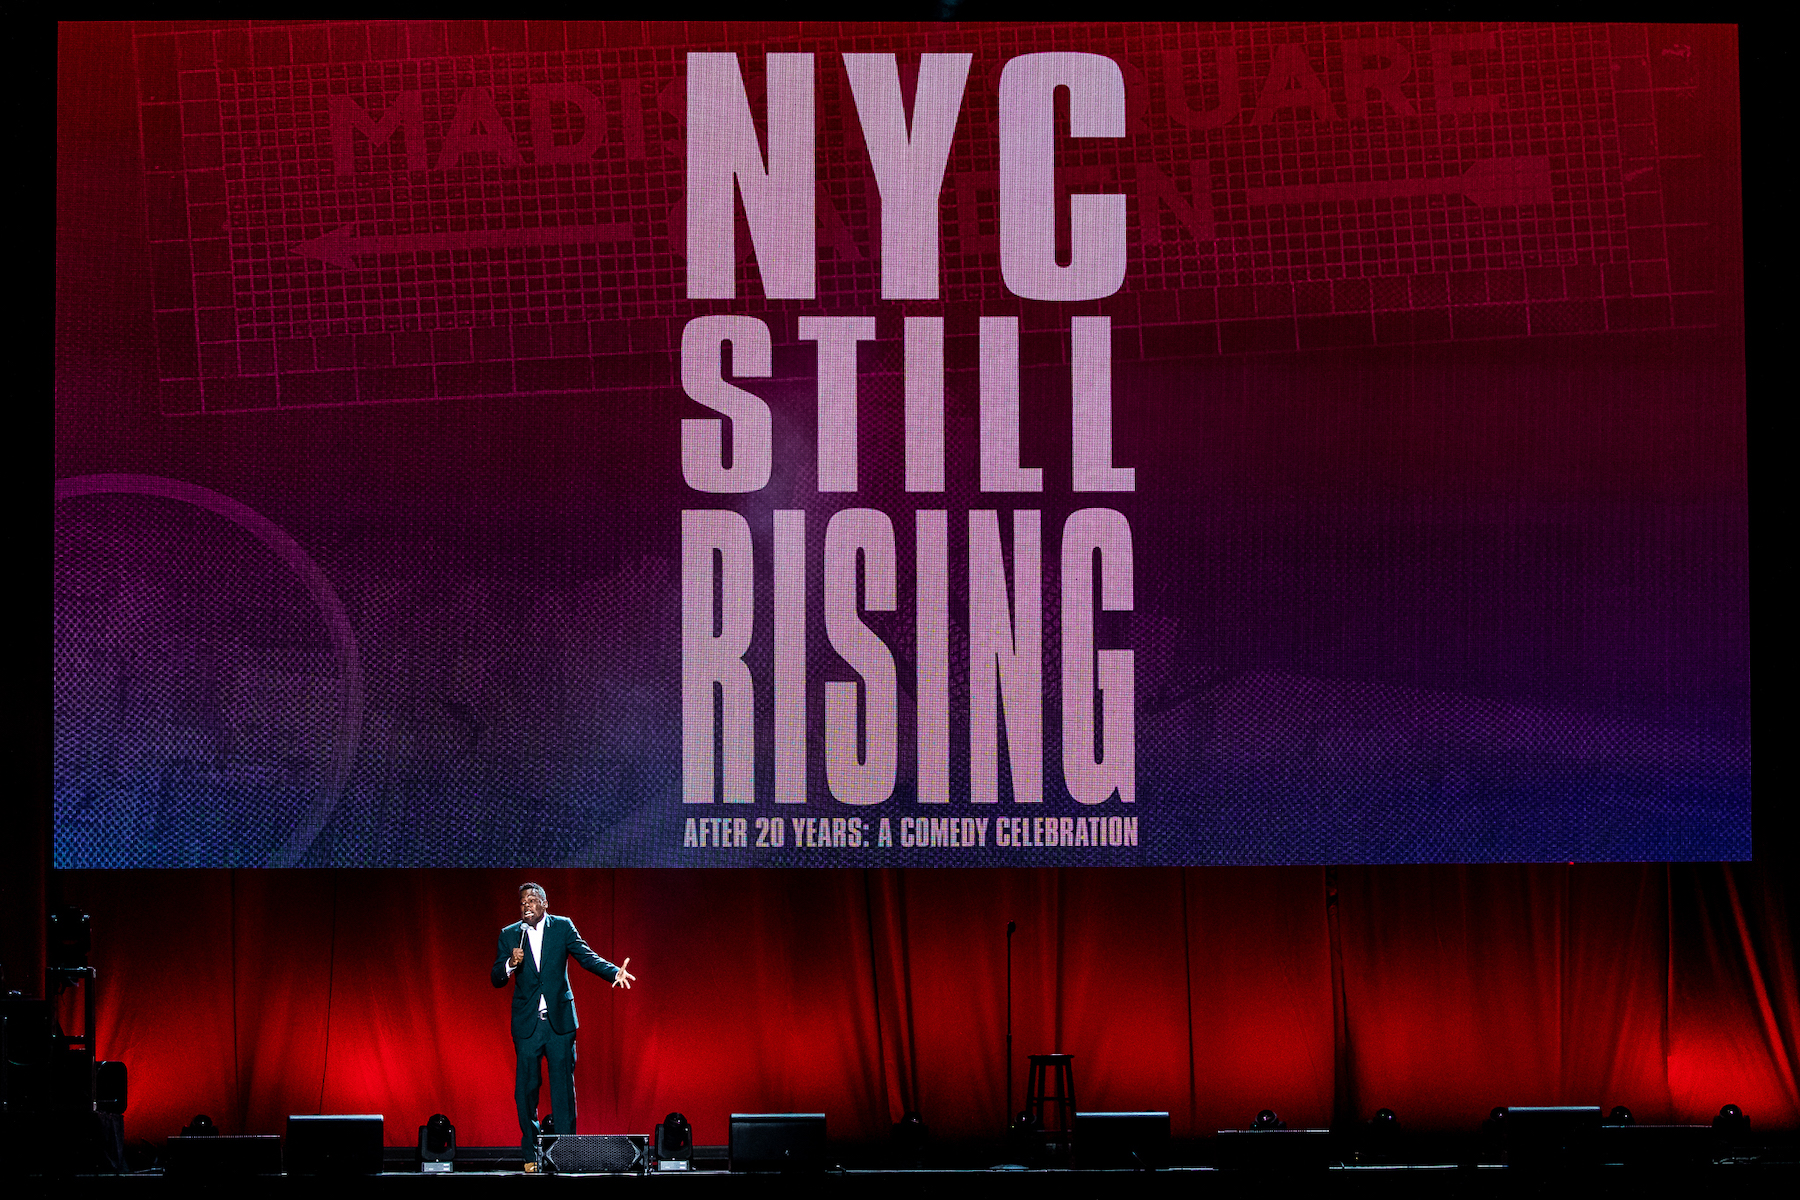 Photo 12 in 'NYC STILL RISING After 20 years:  A Comedy Celebration' gallery showcasing lighting design by Mike Baldassari of Mike-O-Matic Industries LLC